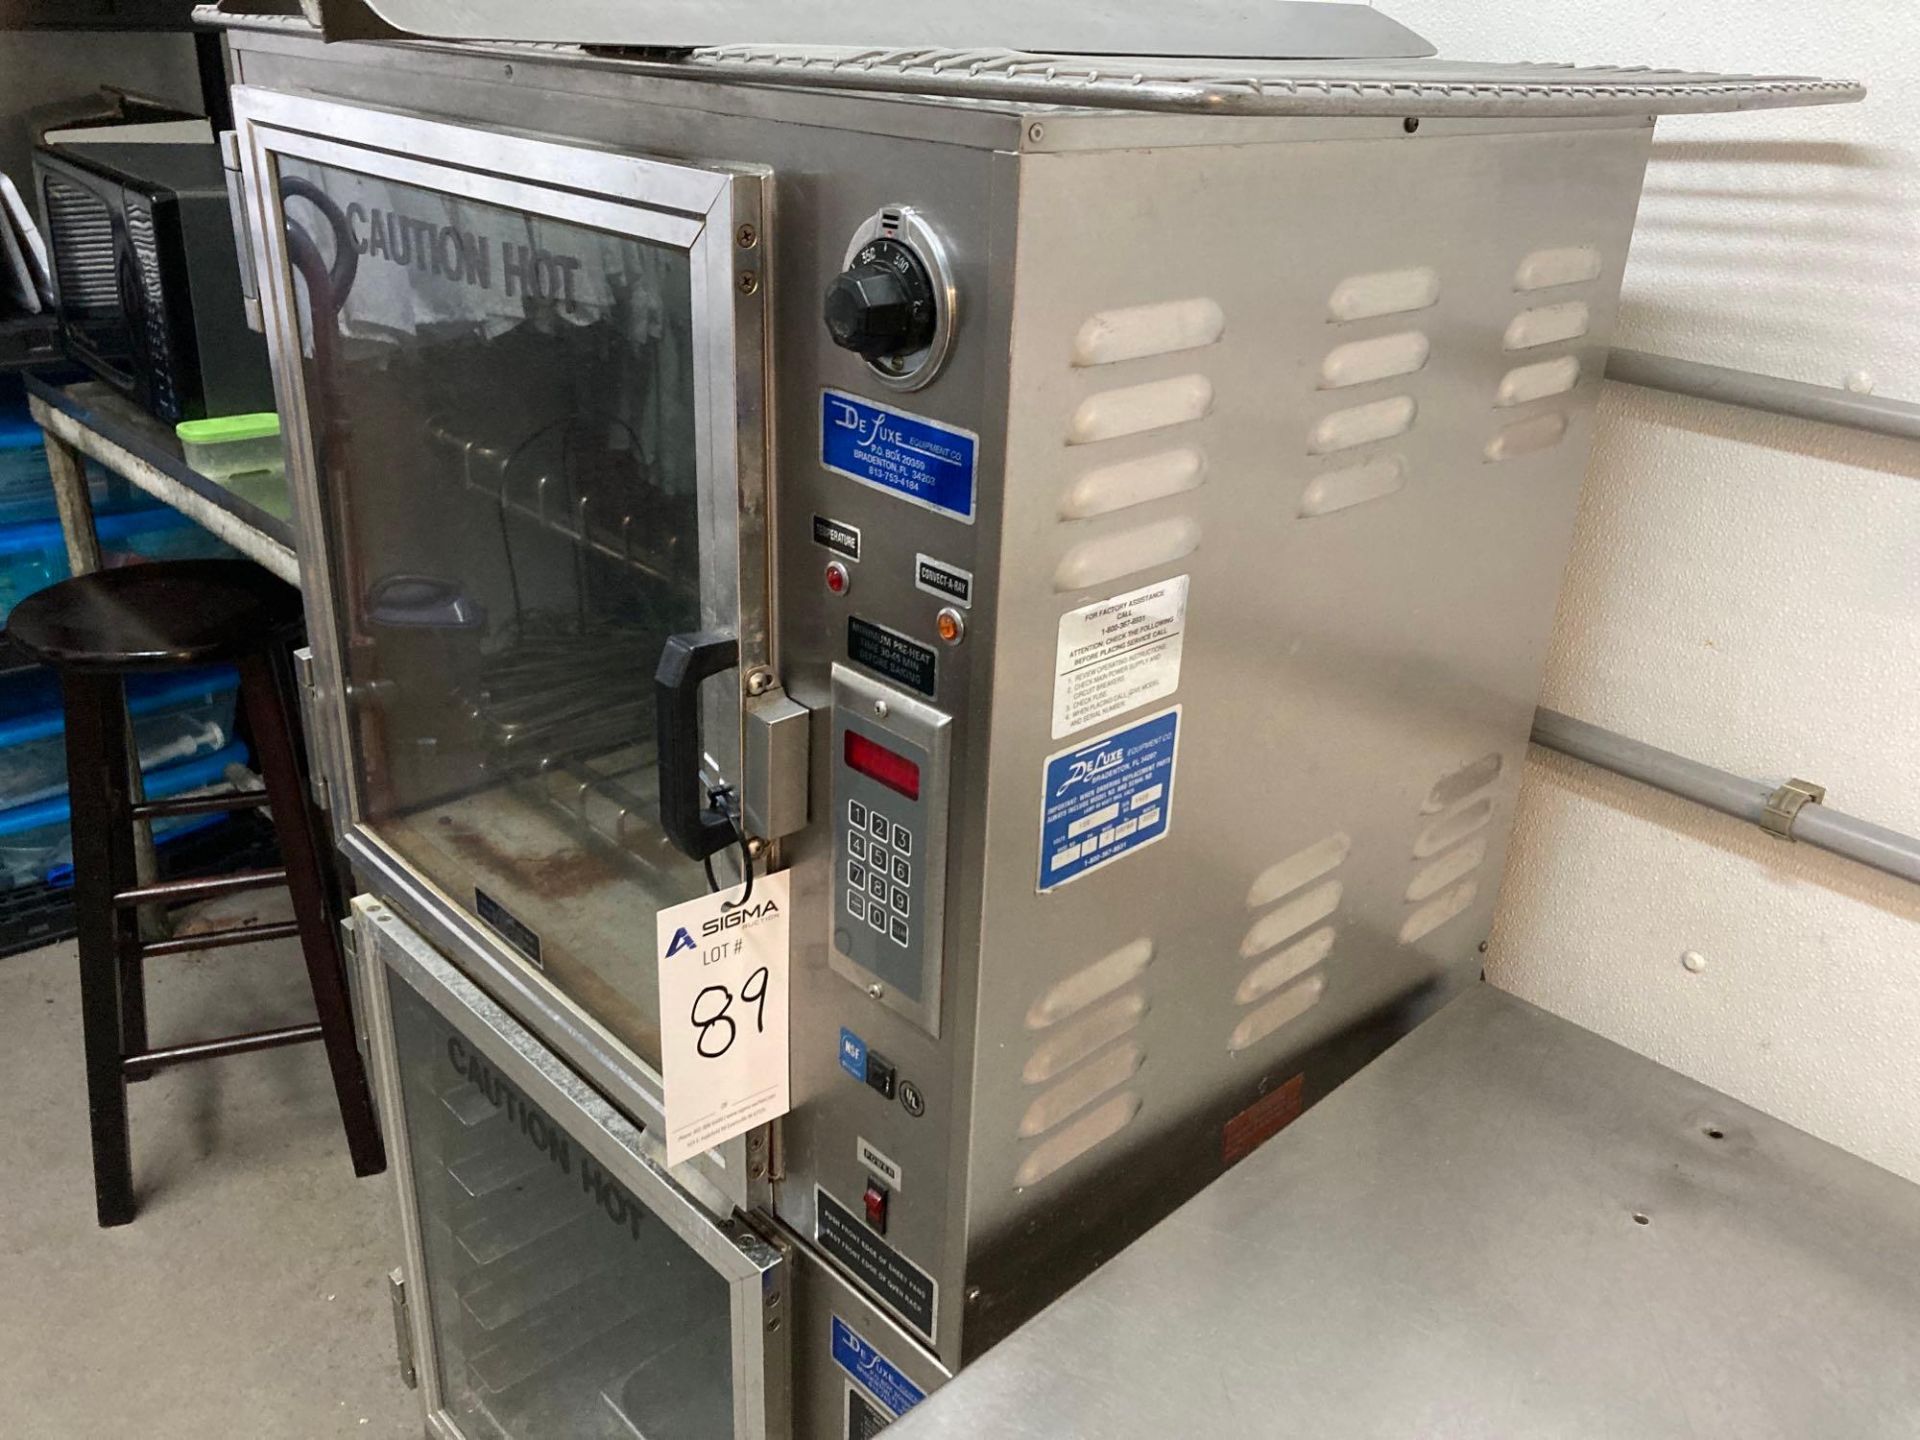 DeLuxe CR-1/2 Convect-a-ray Double Rack Oven - Image 4 of 8